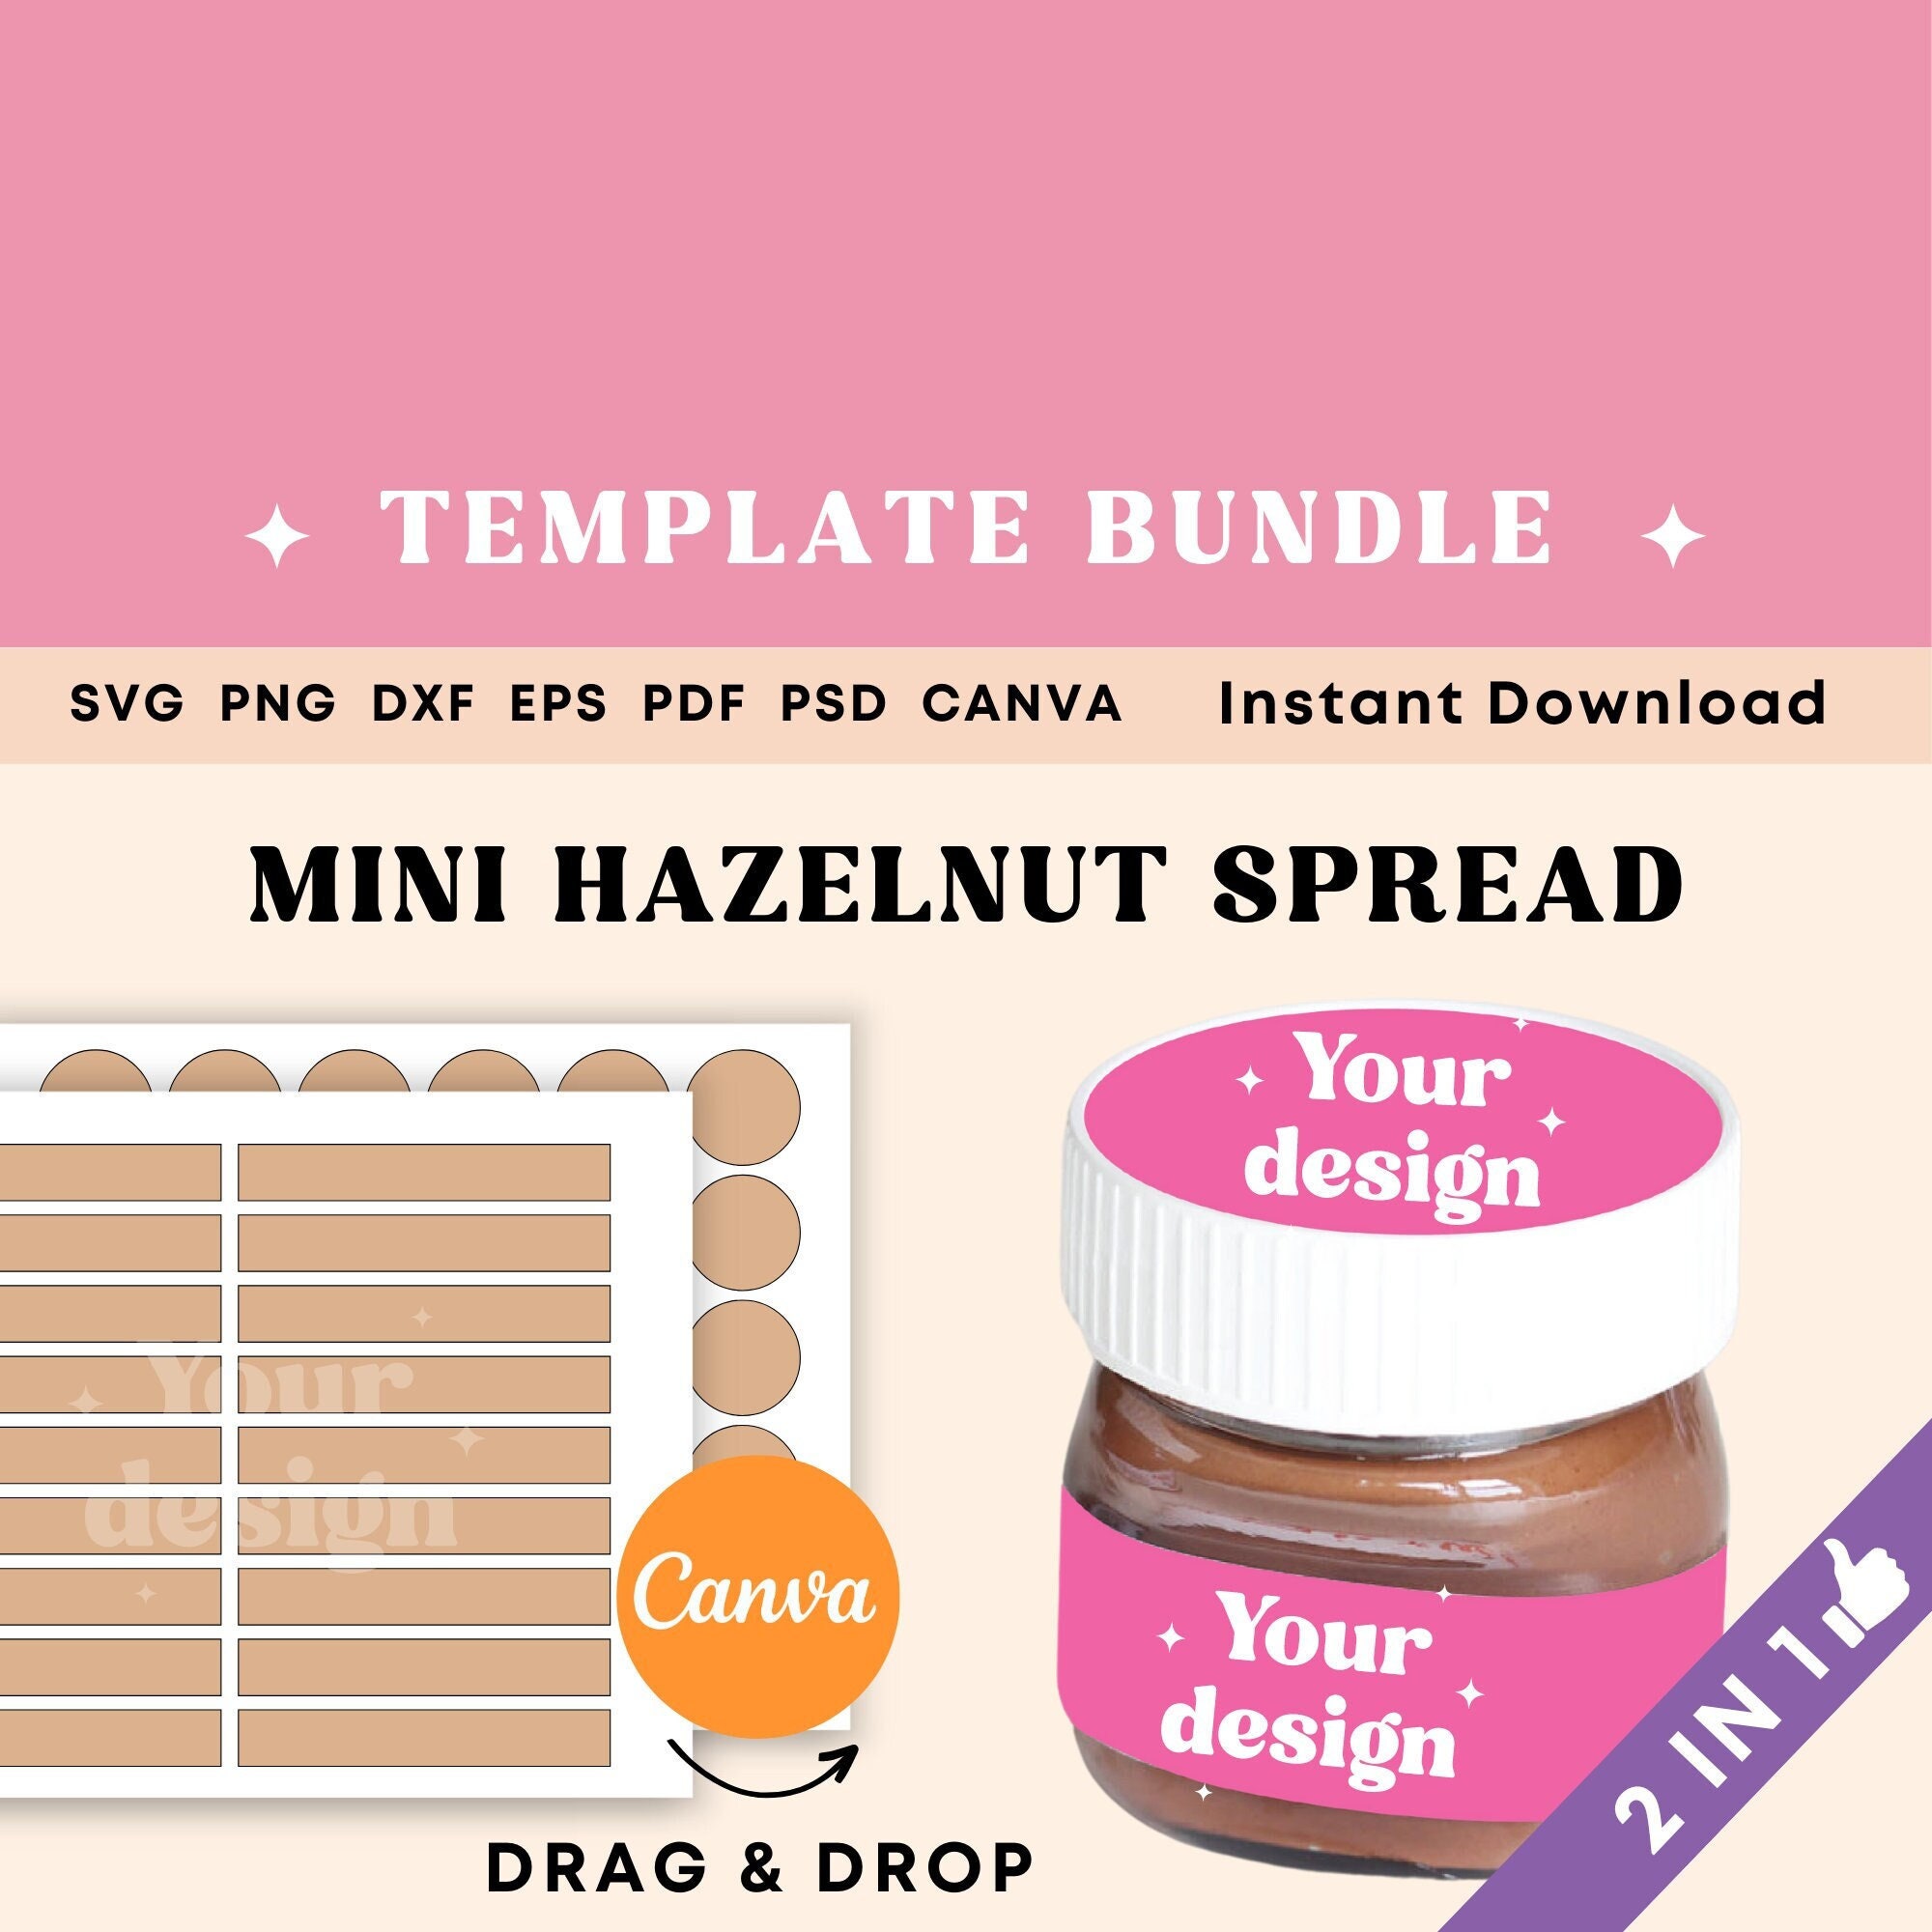 Mini Nutella Box Template with handle - Nutella 25g box template for Cricut  and Silhouette - oh partyland